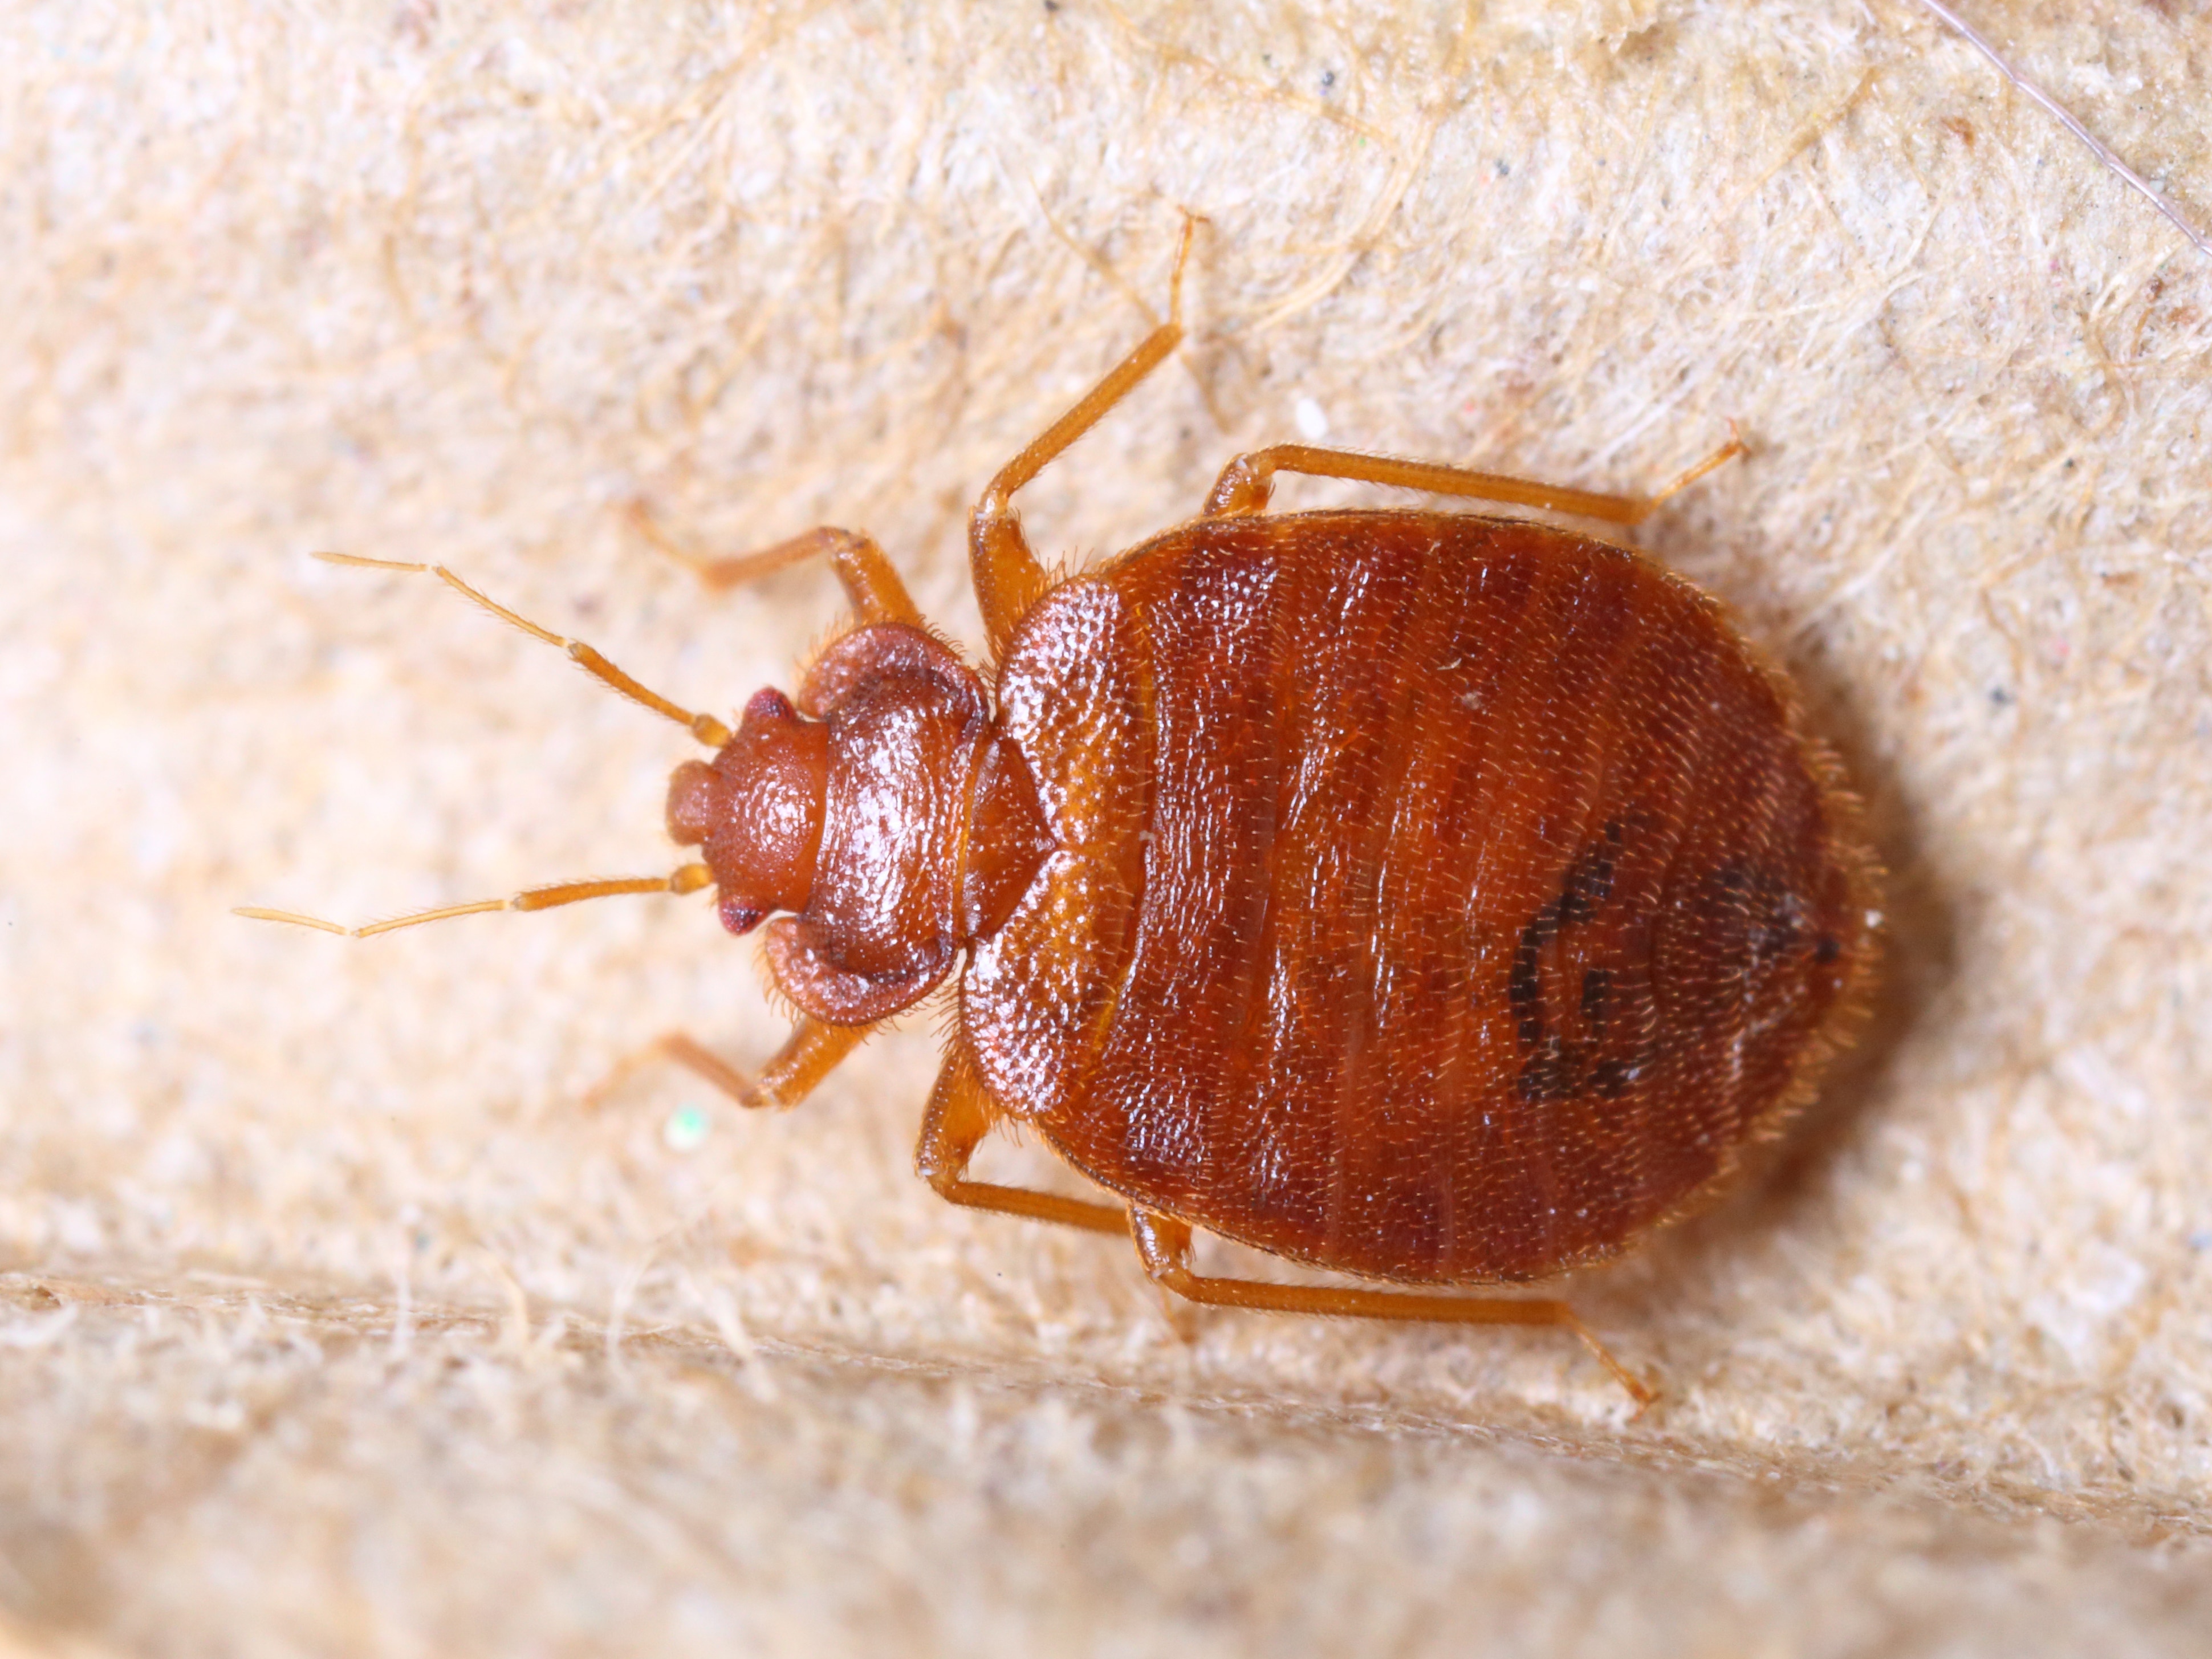 An adult bed bug